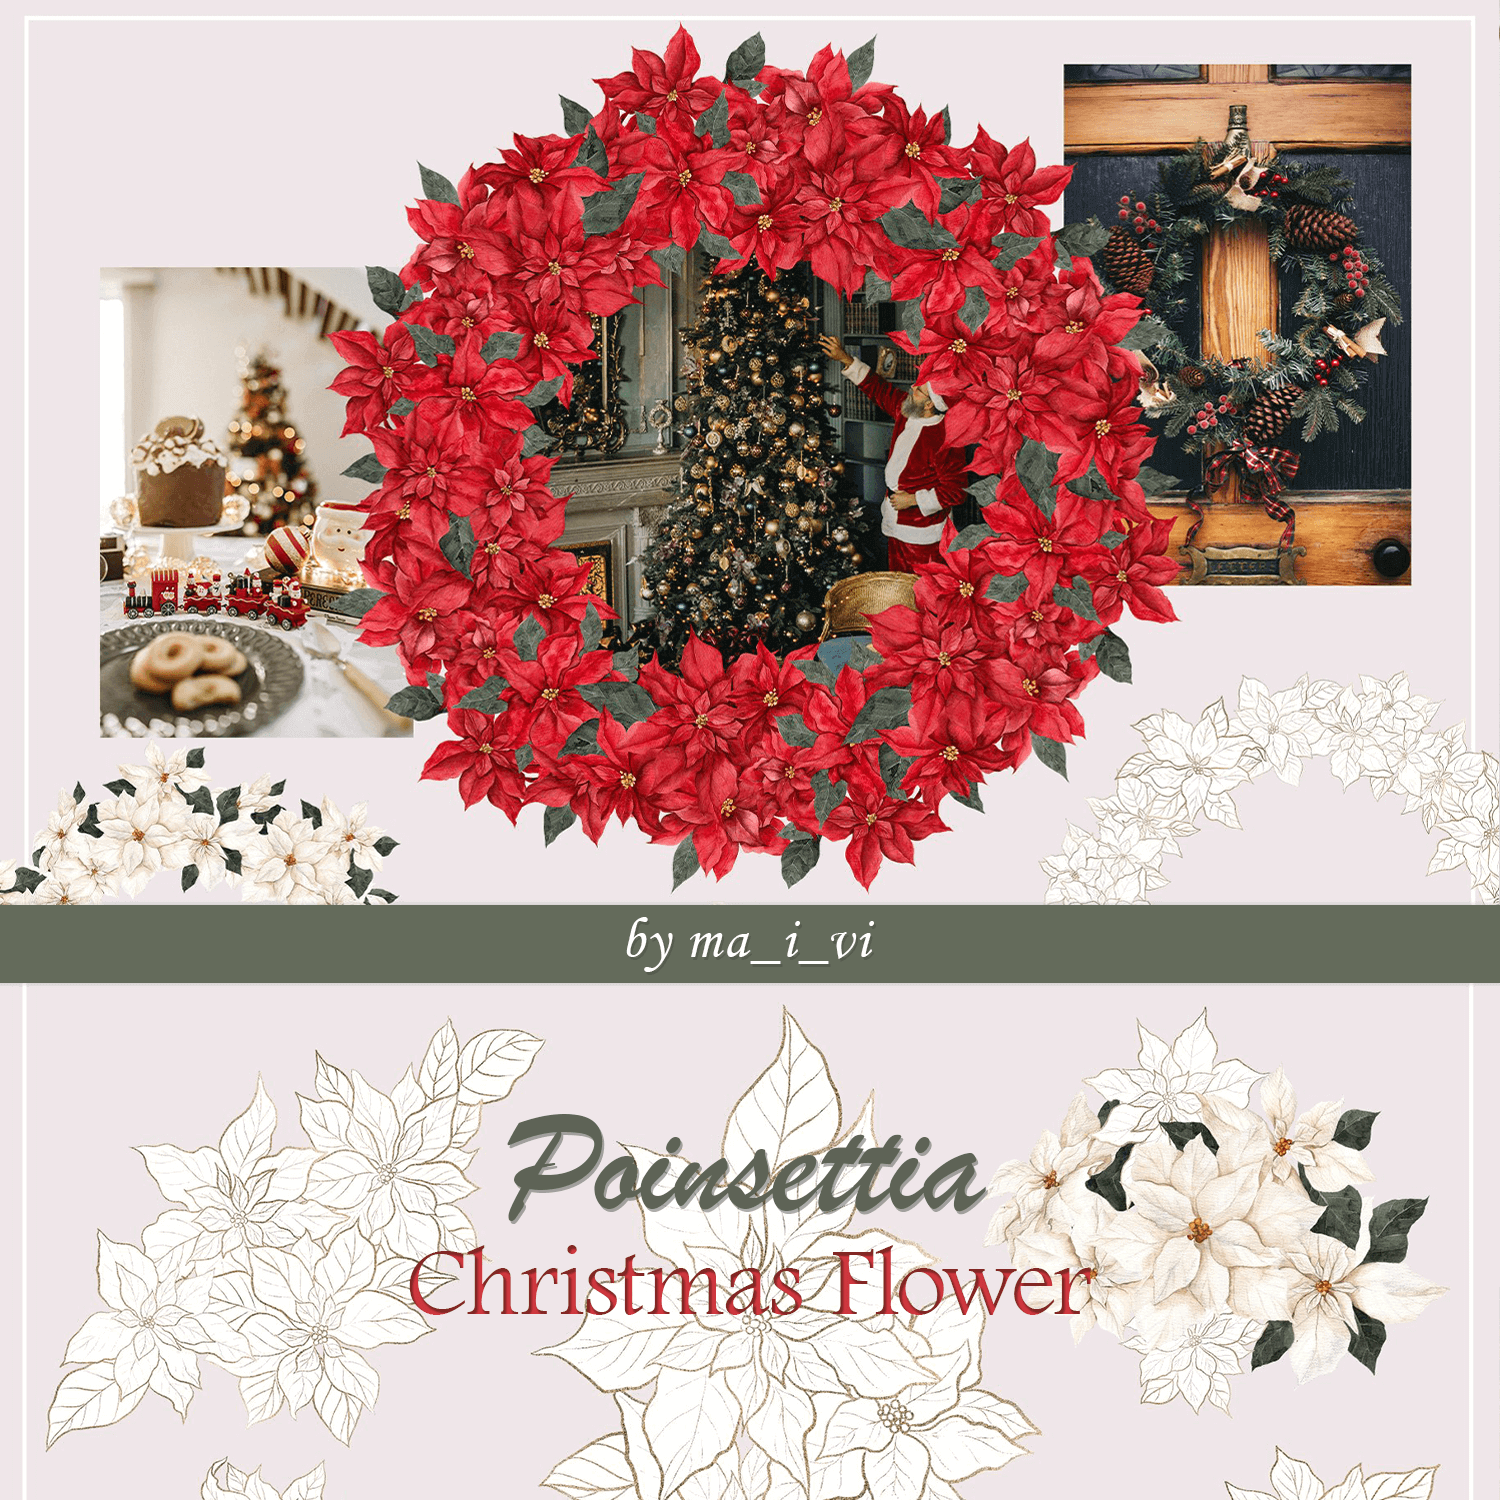 Beautiful Christmas seamless pattern with poinsettia flowers, red